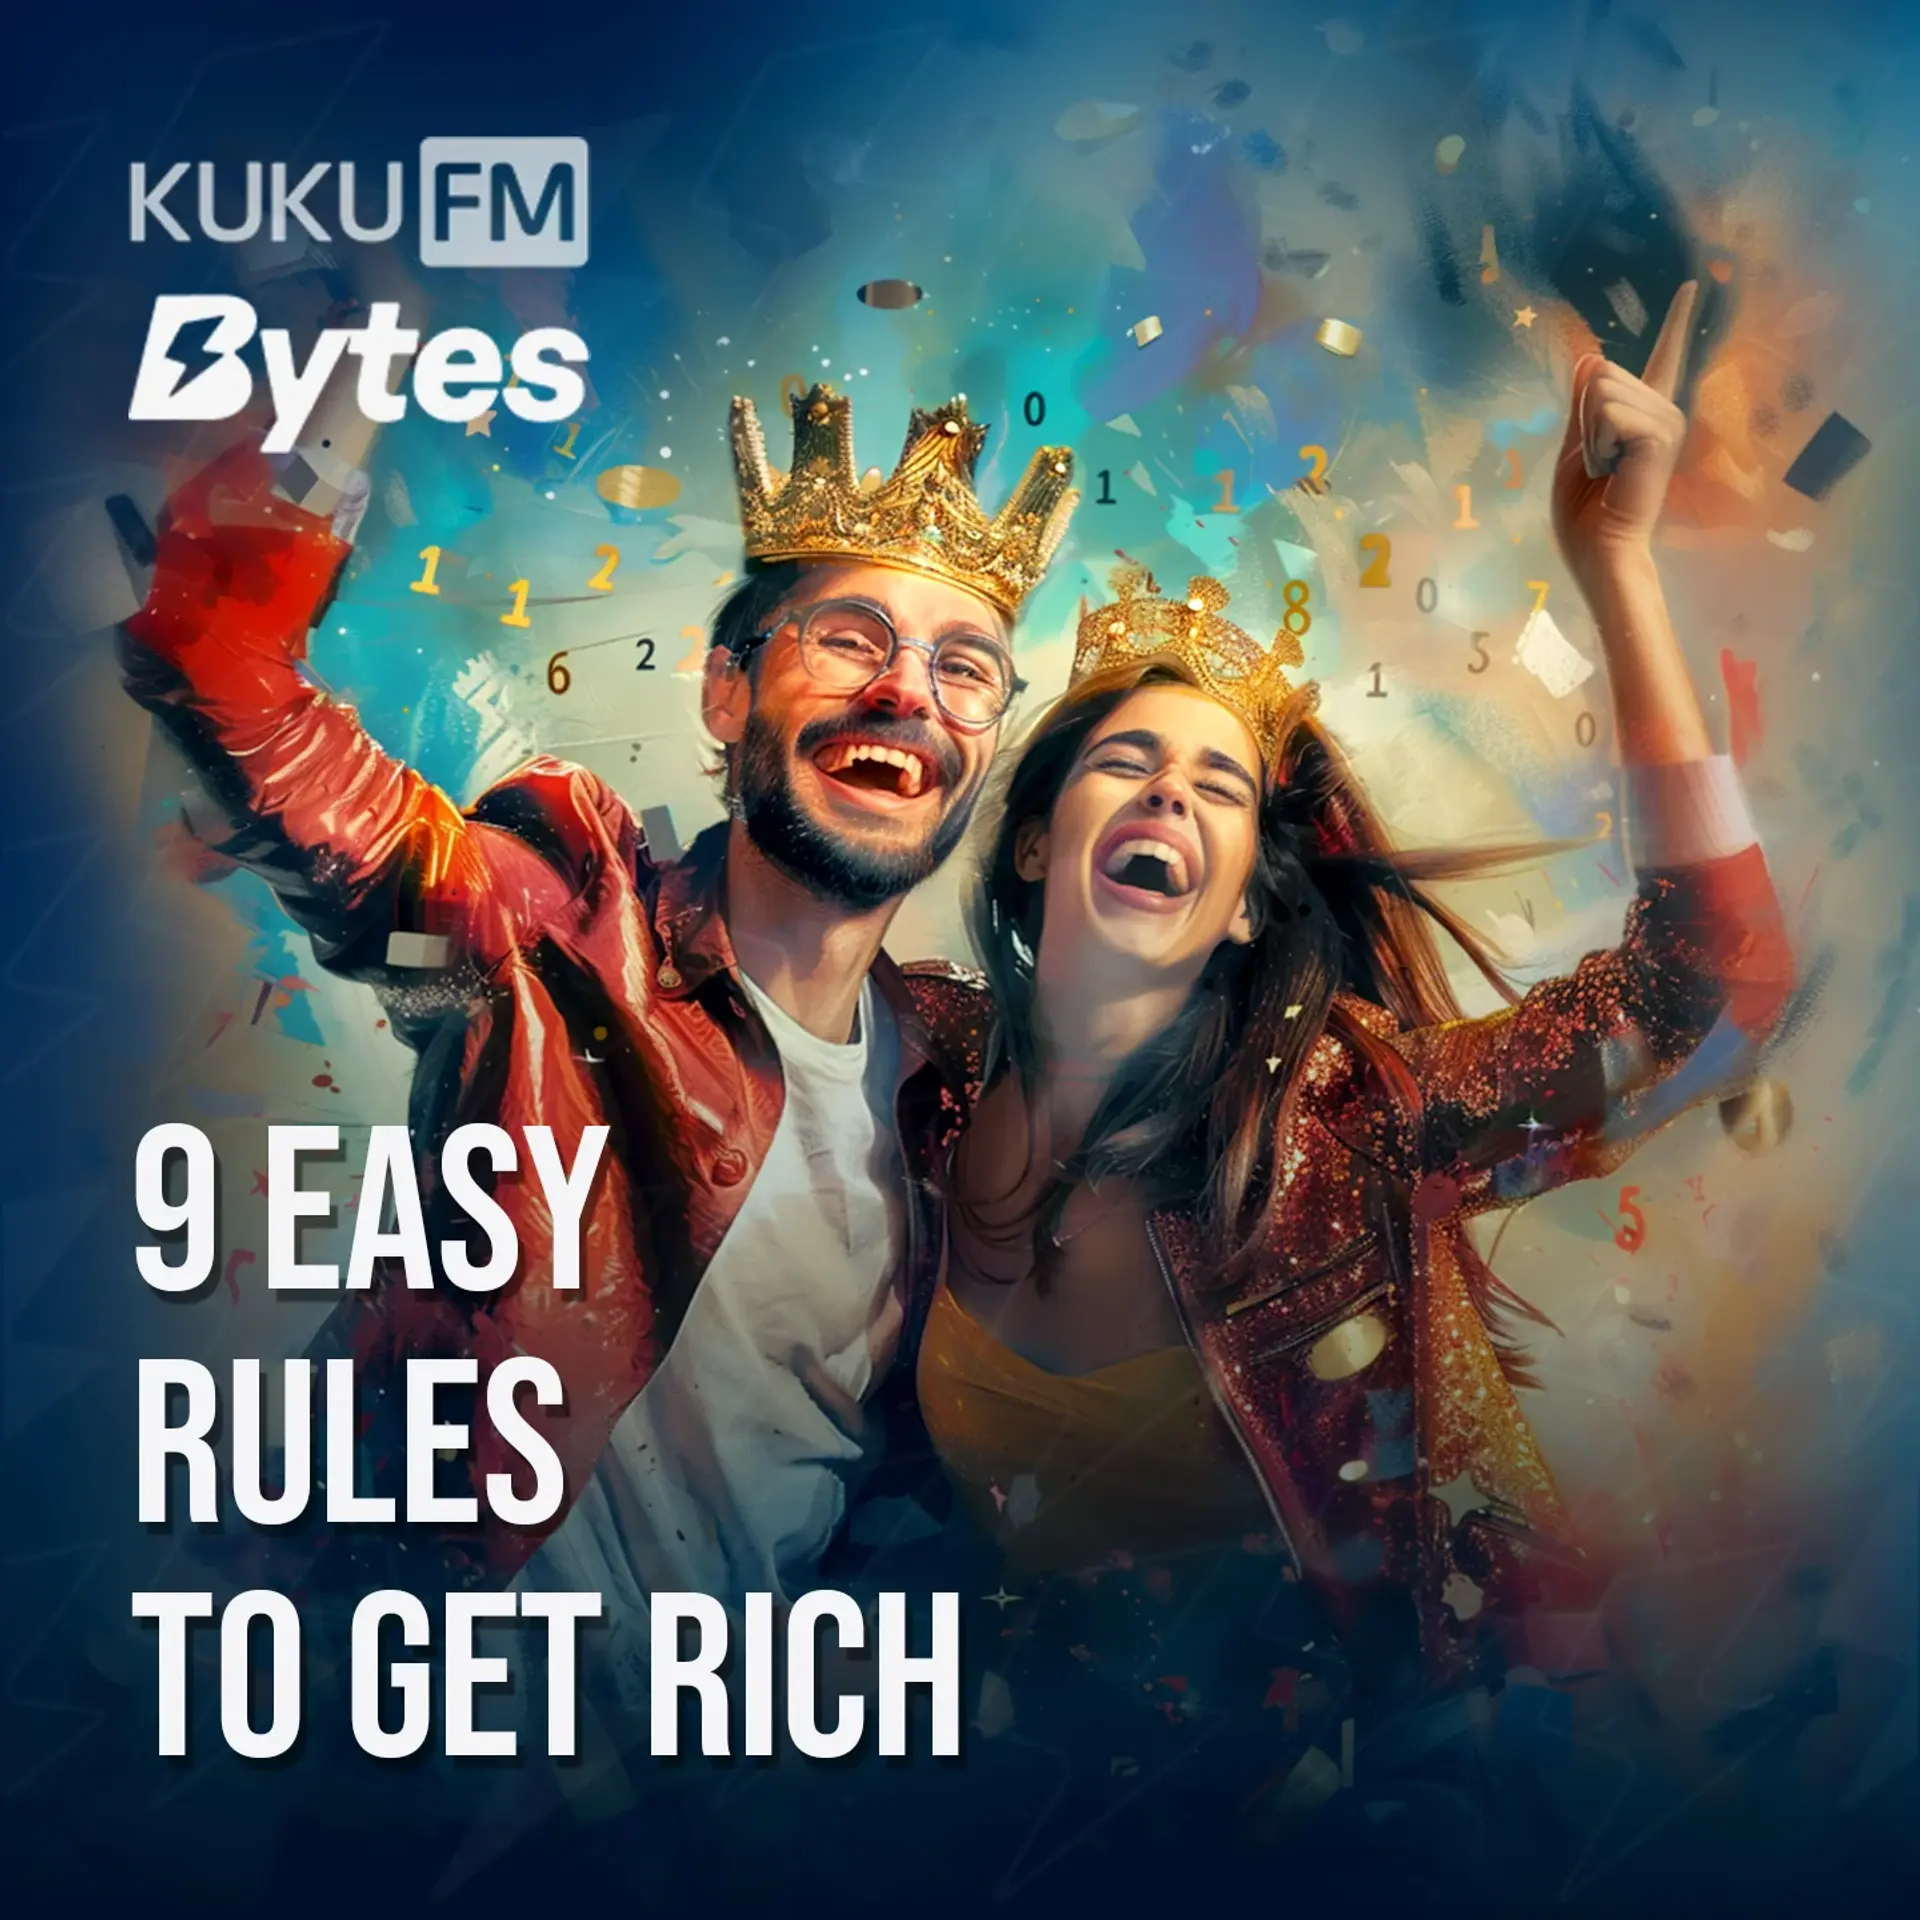 1. Become Rich with Easy Formulas | 